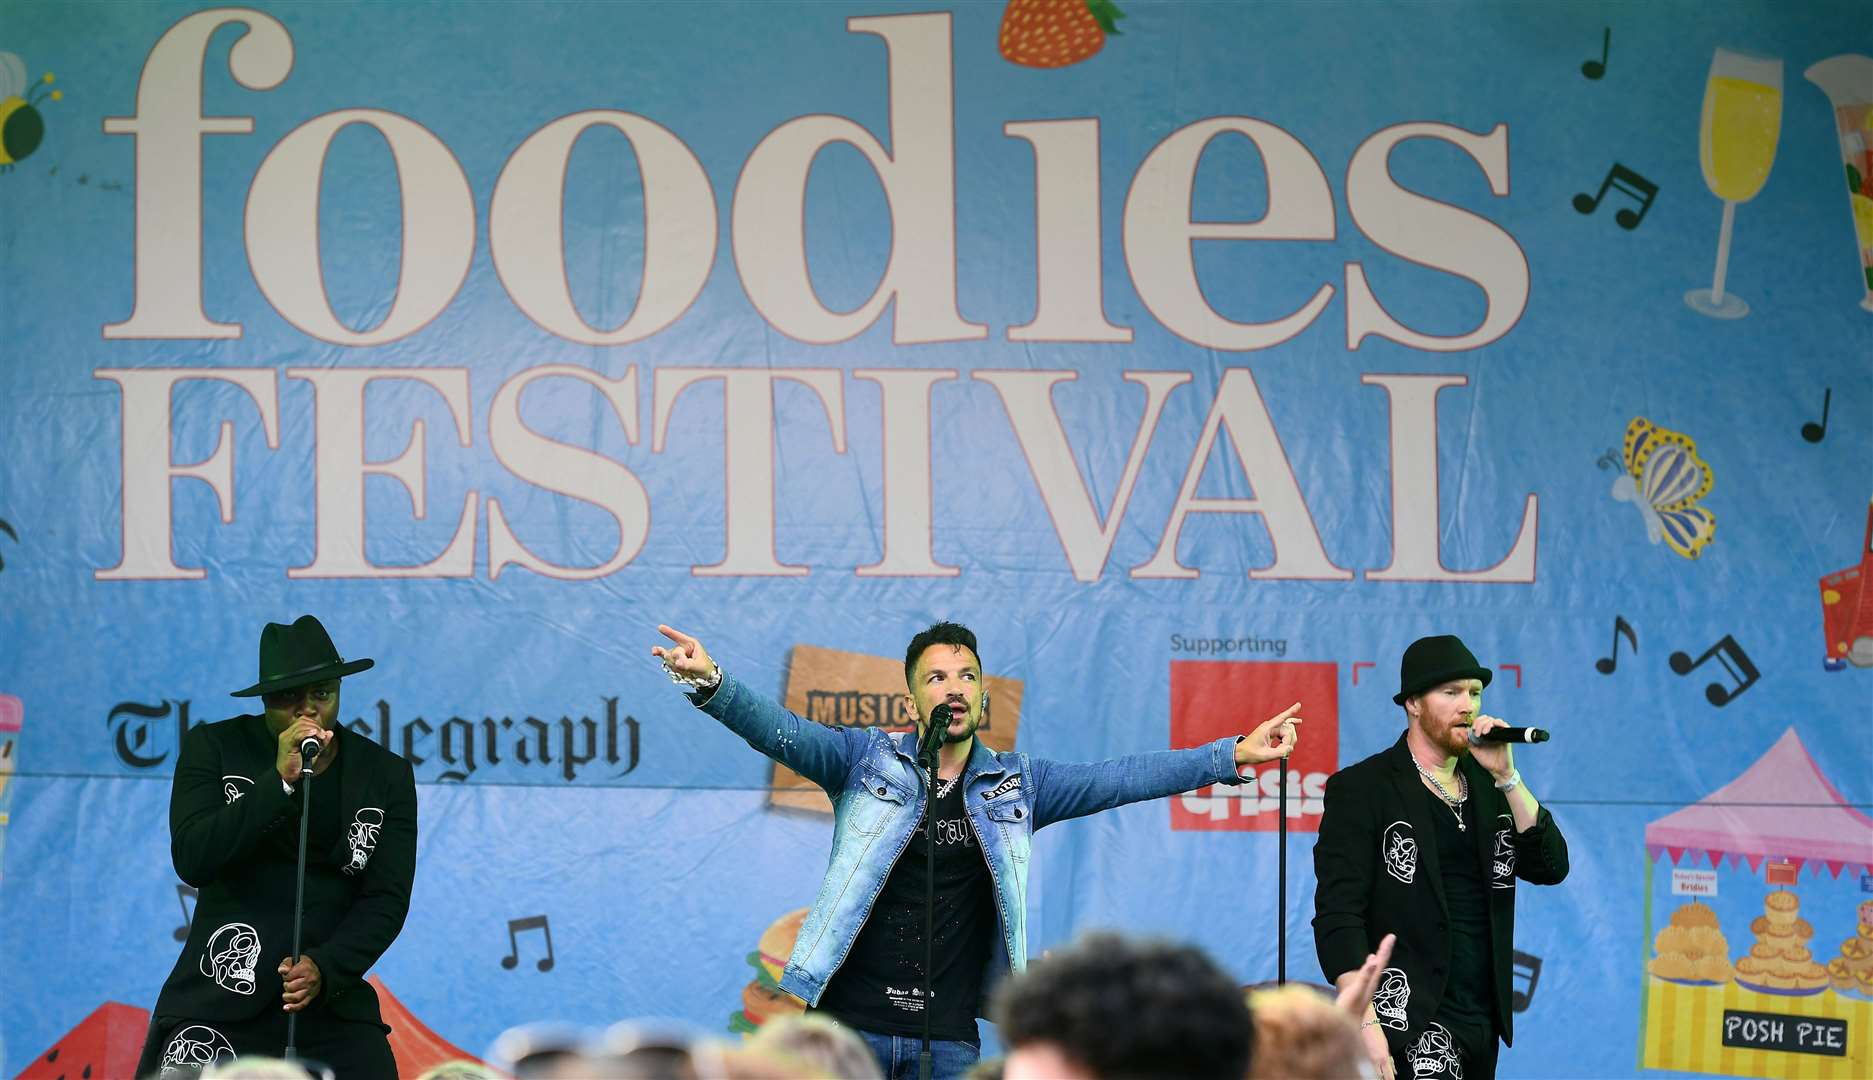 Peter Andre will perform and cook on stage at the festival. Picture: Foodies Festival